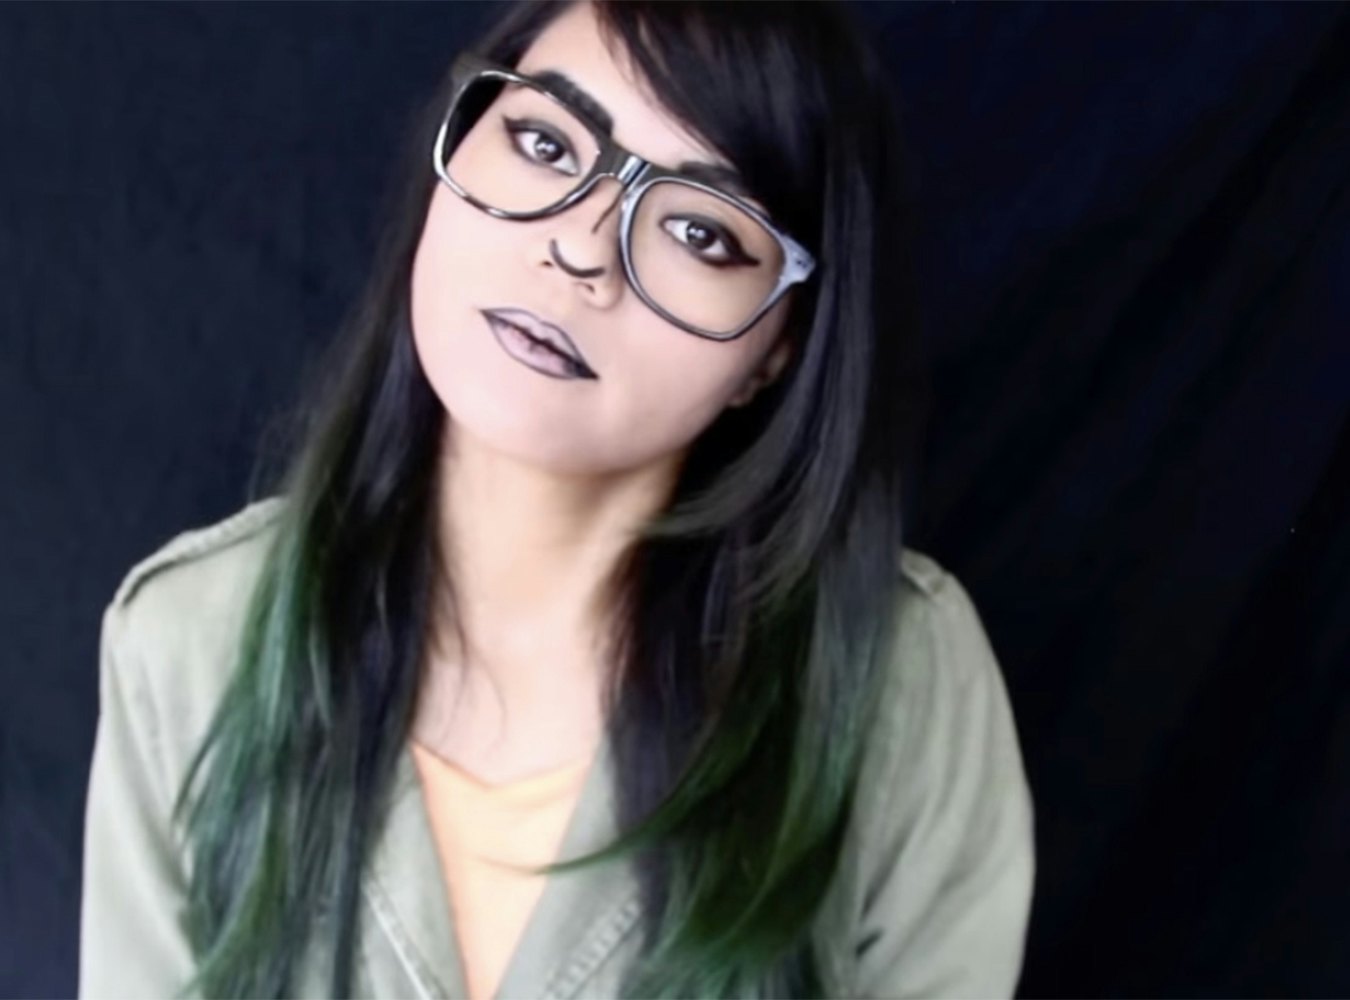 Easy Halloween Makeup Ideas For Glasses From Daria To Harry Potter